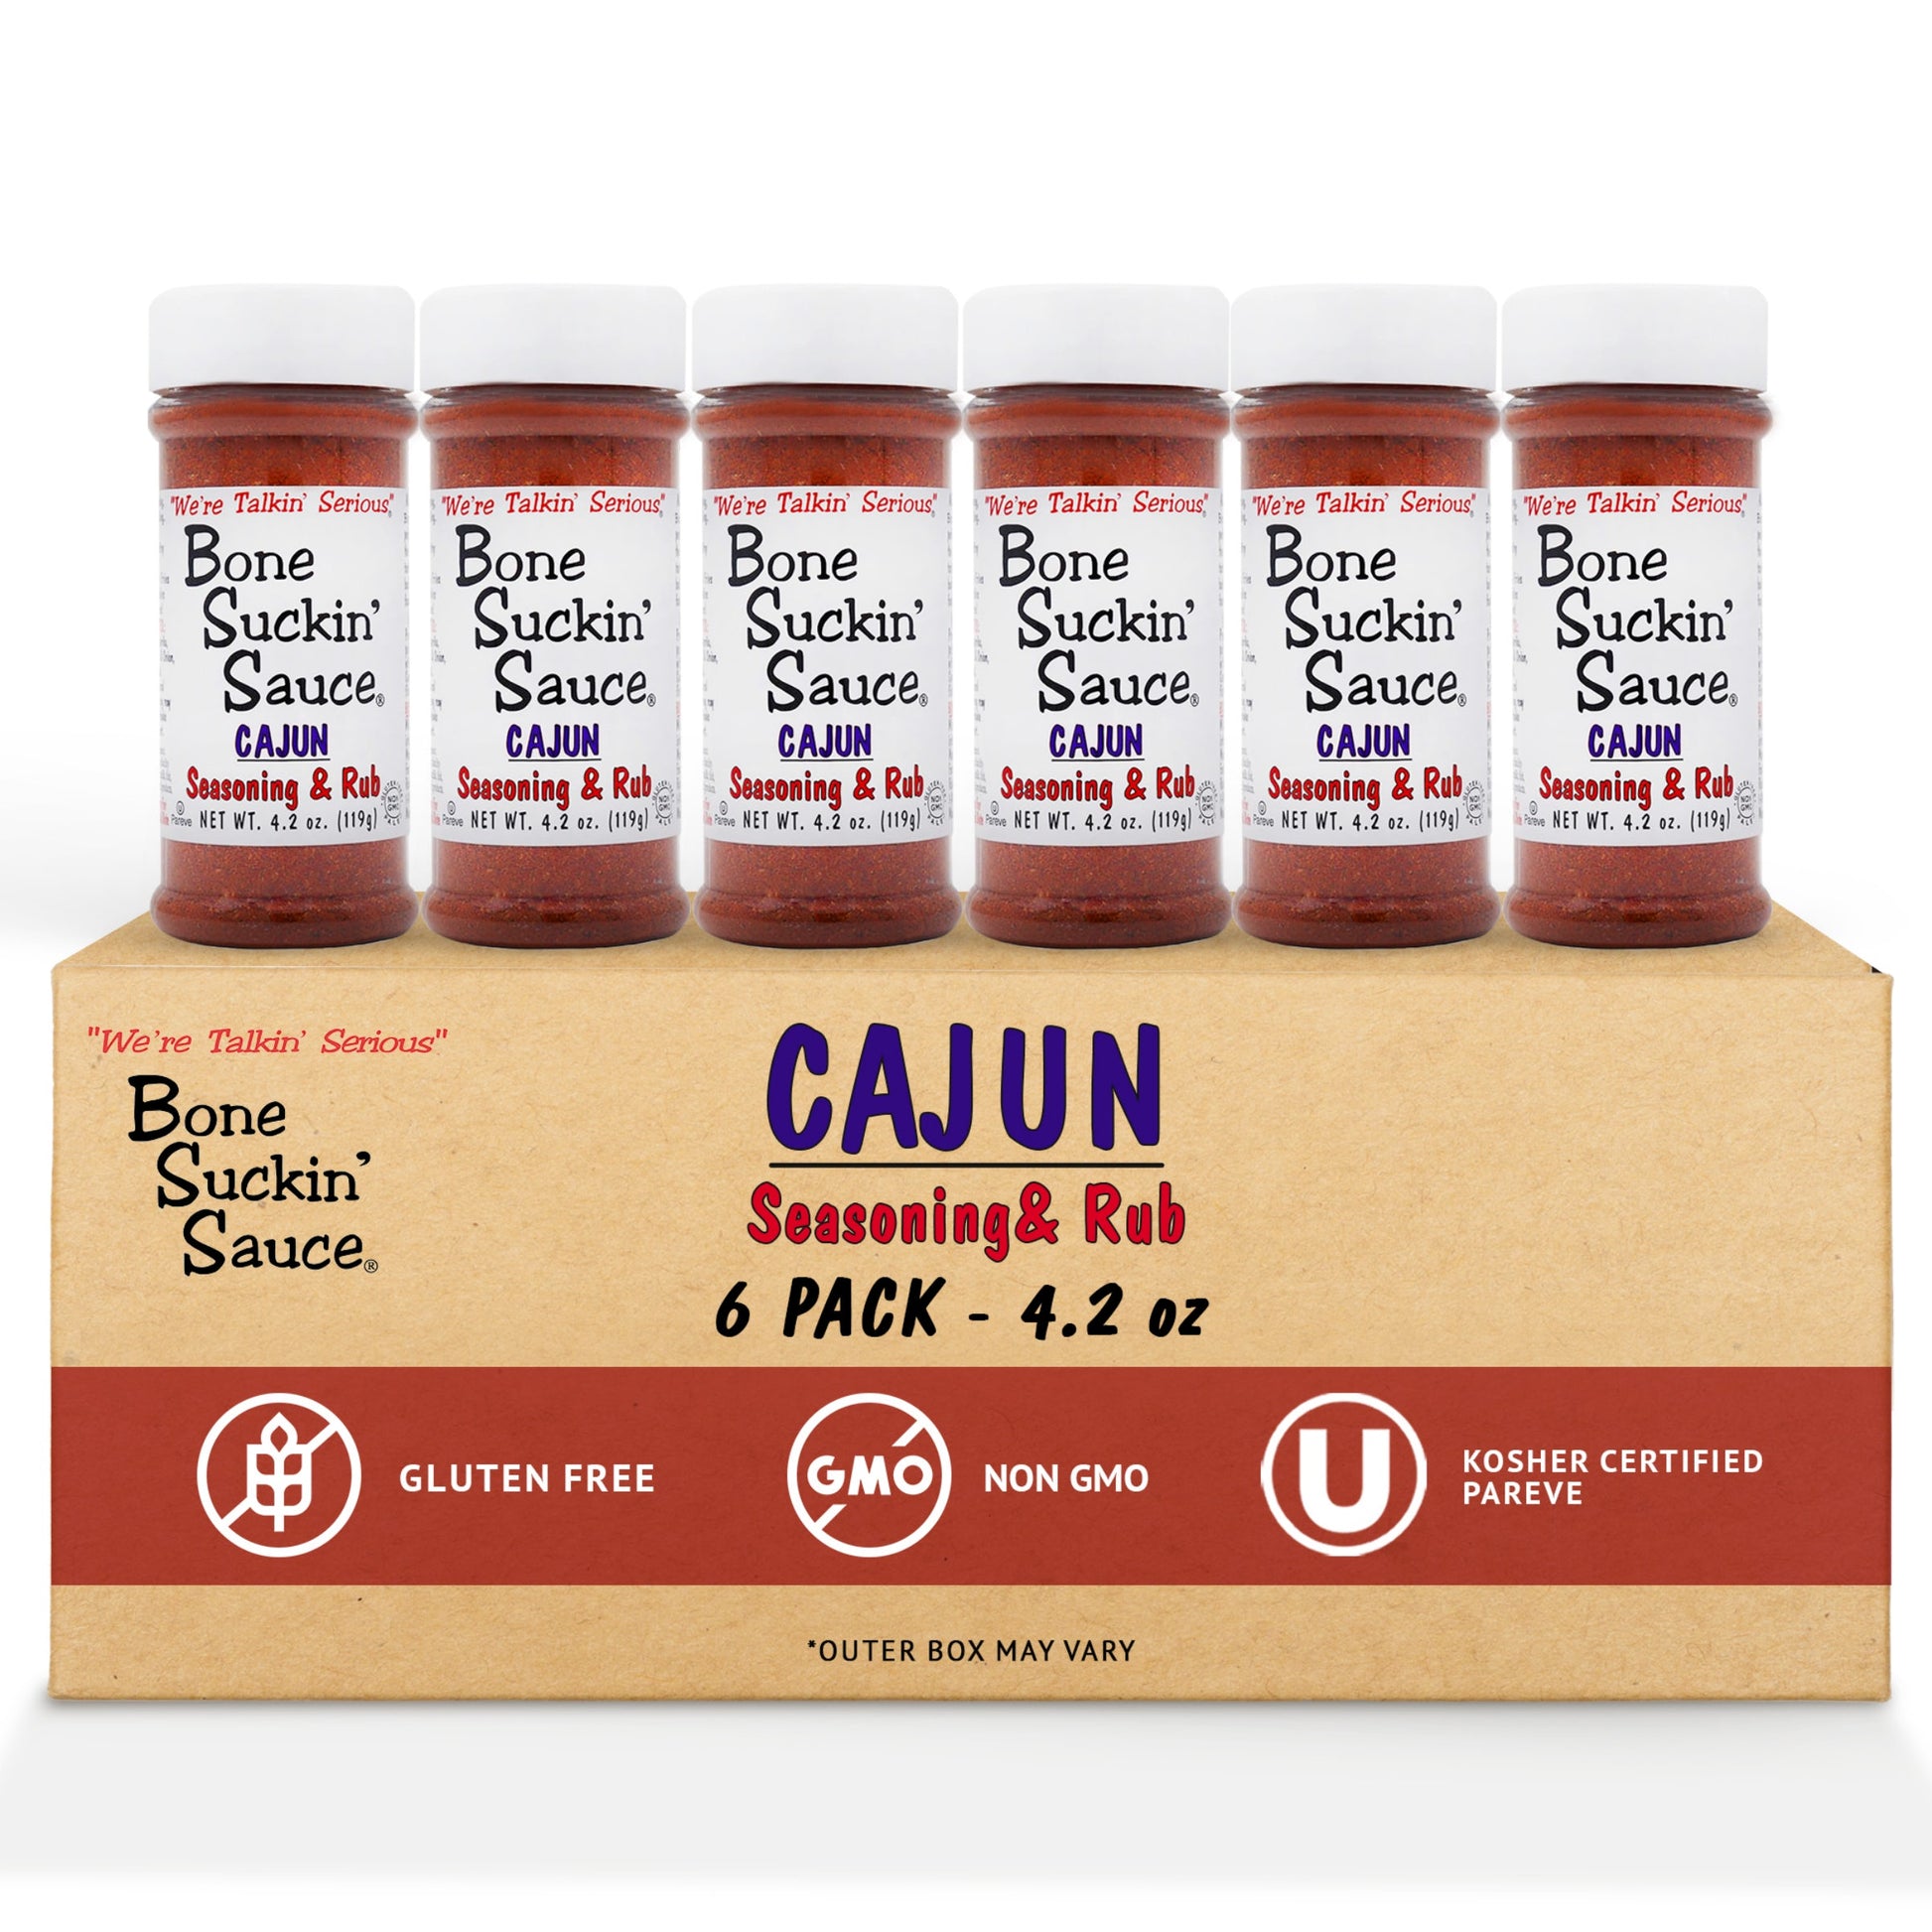 Bone Suckin'® Cajun Seasoning & Rub, 4.2 oz., is the perfect blend of Cajun spices & herbs along with the right amount of heat. It makes your food taste great, gets friends talking & coming back for more! Use generously & your Cajun food will be "Bone Suckin'® Good!" Use On Seafood, Poultry, Steaks, Pork, Pasta, French Fries, Rice, Vegetables, Gumbos, Jambalayas & more! 6 pack